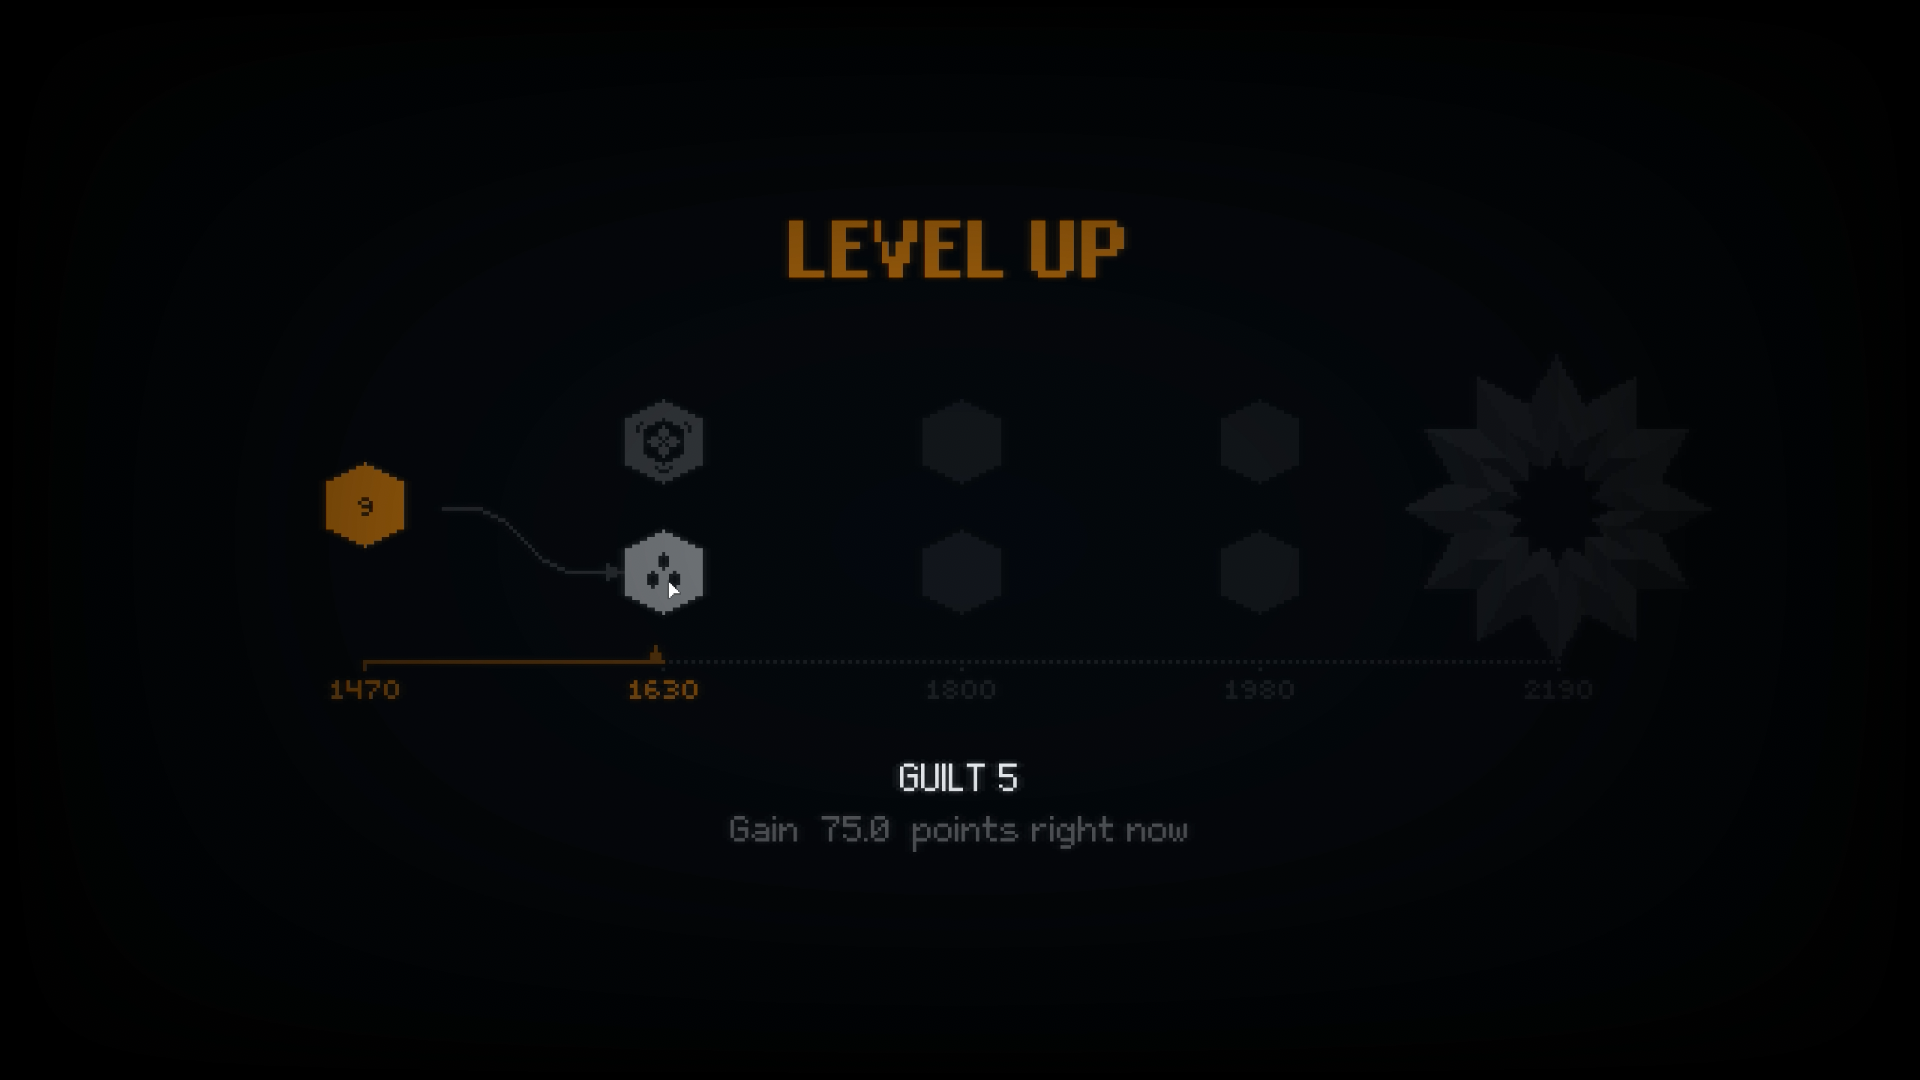 A level-up screen from Indika, showing an option called 